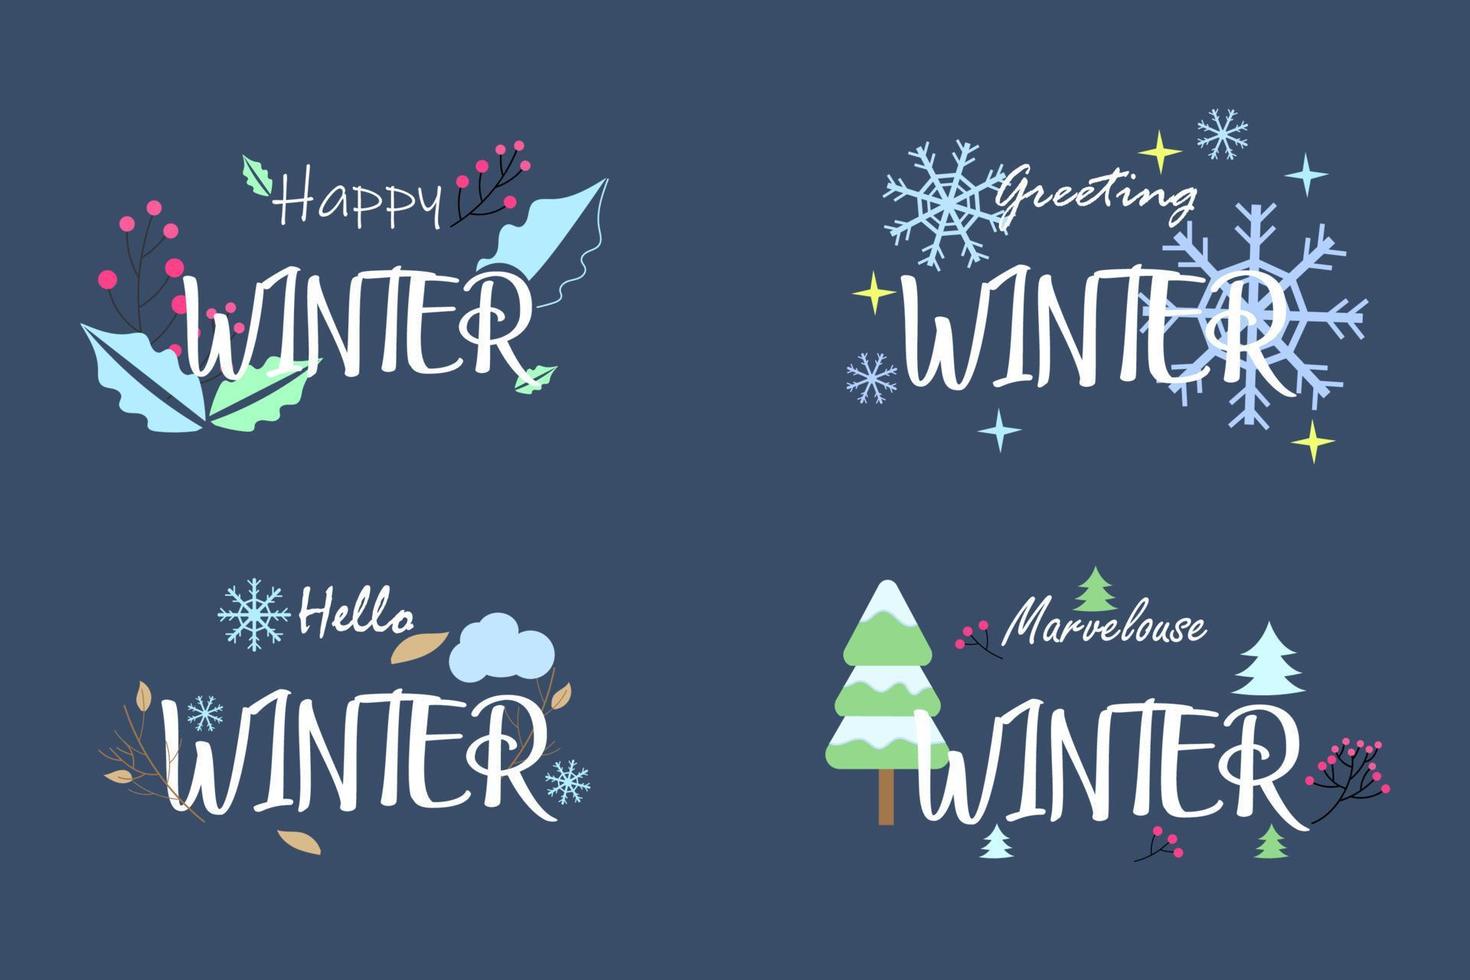 Winter lettering set with phrase happy winter, greeting winter, hello winter, marvelous winter for card, print, overlay, decor, poster, banner. Hand drawn winter elements. vector